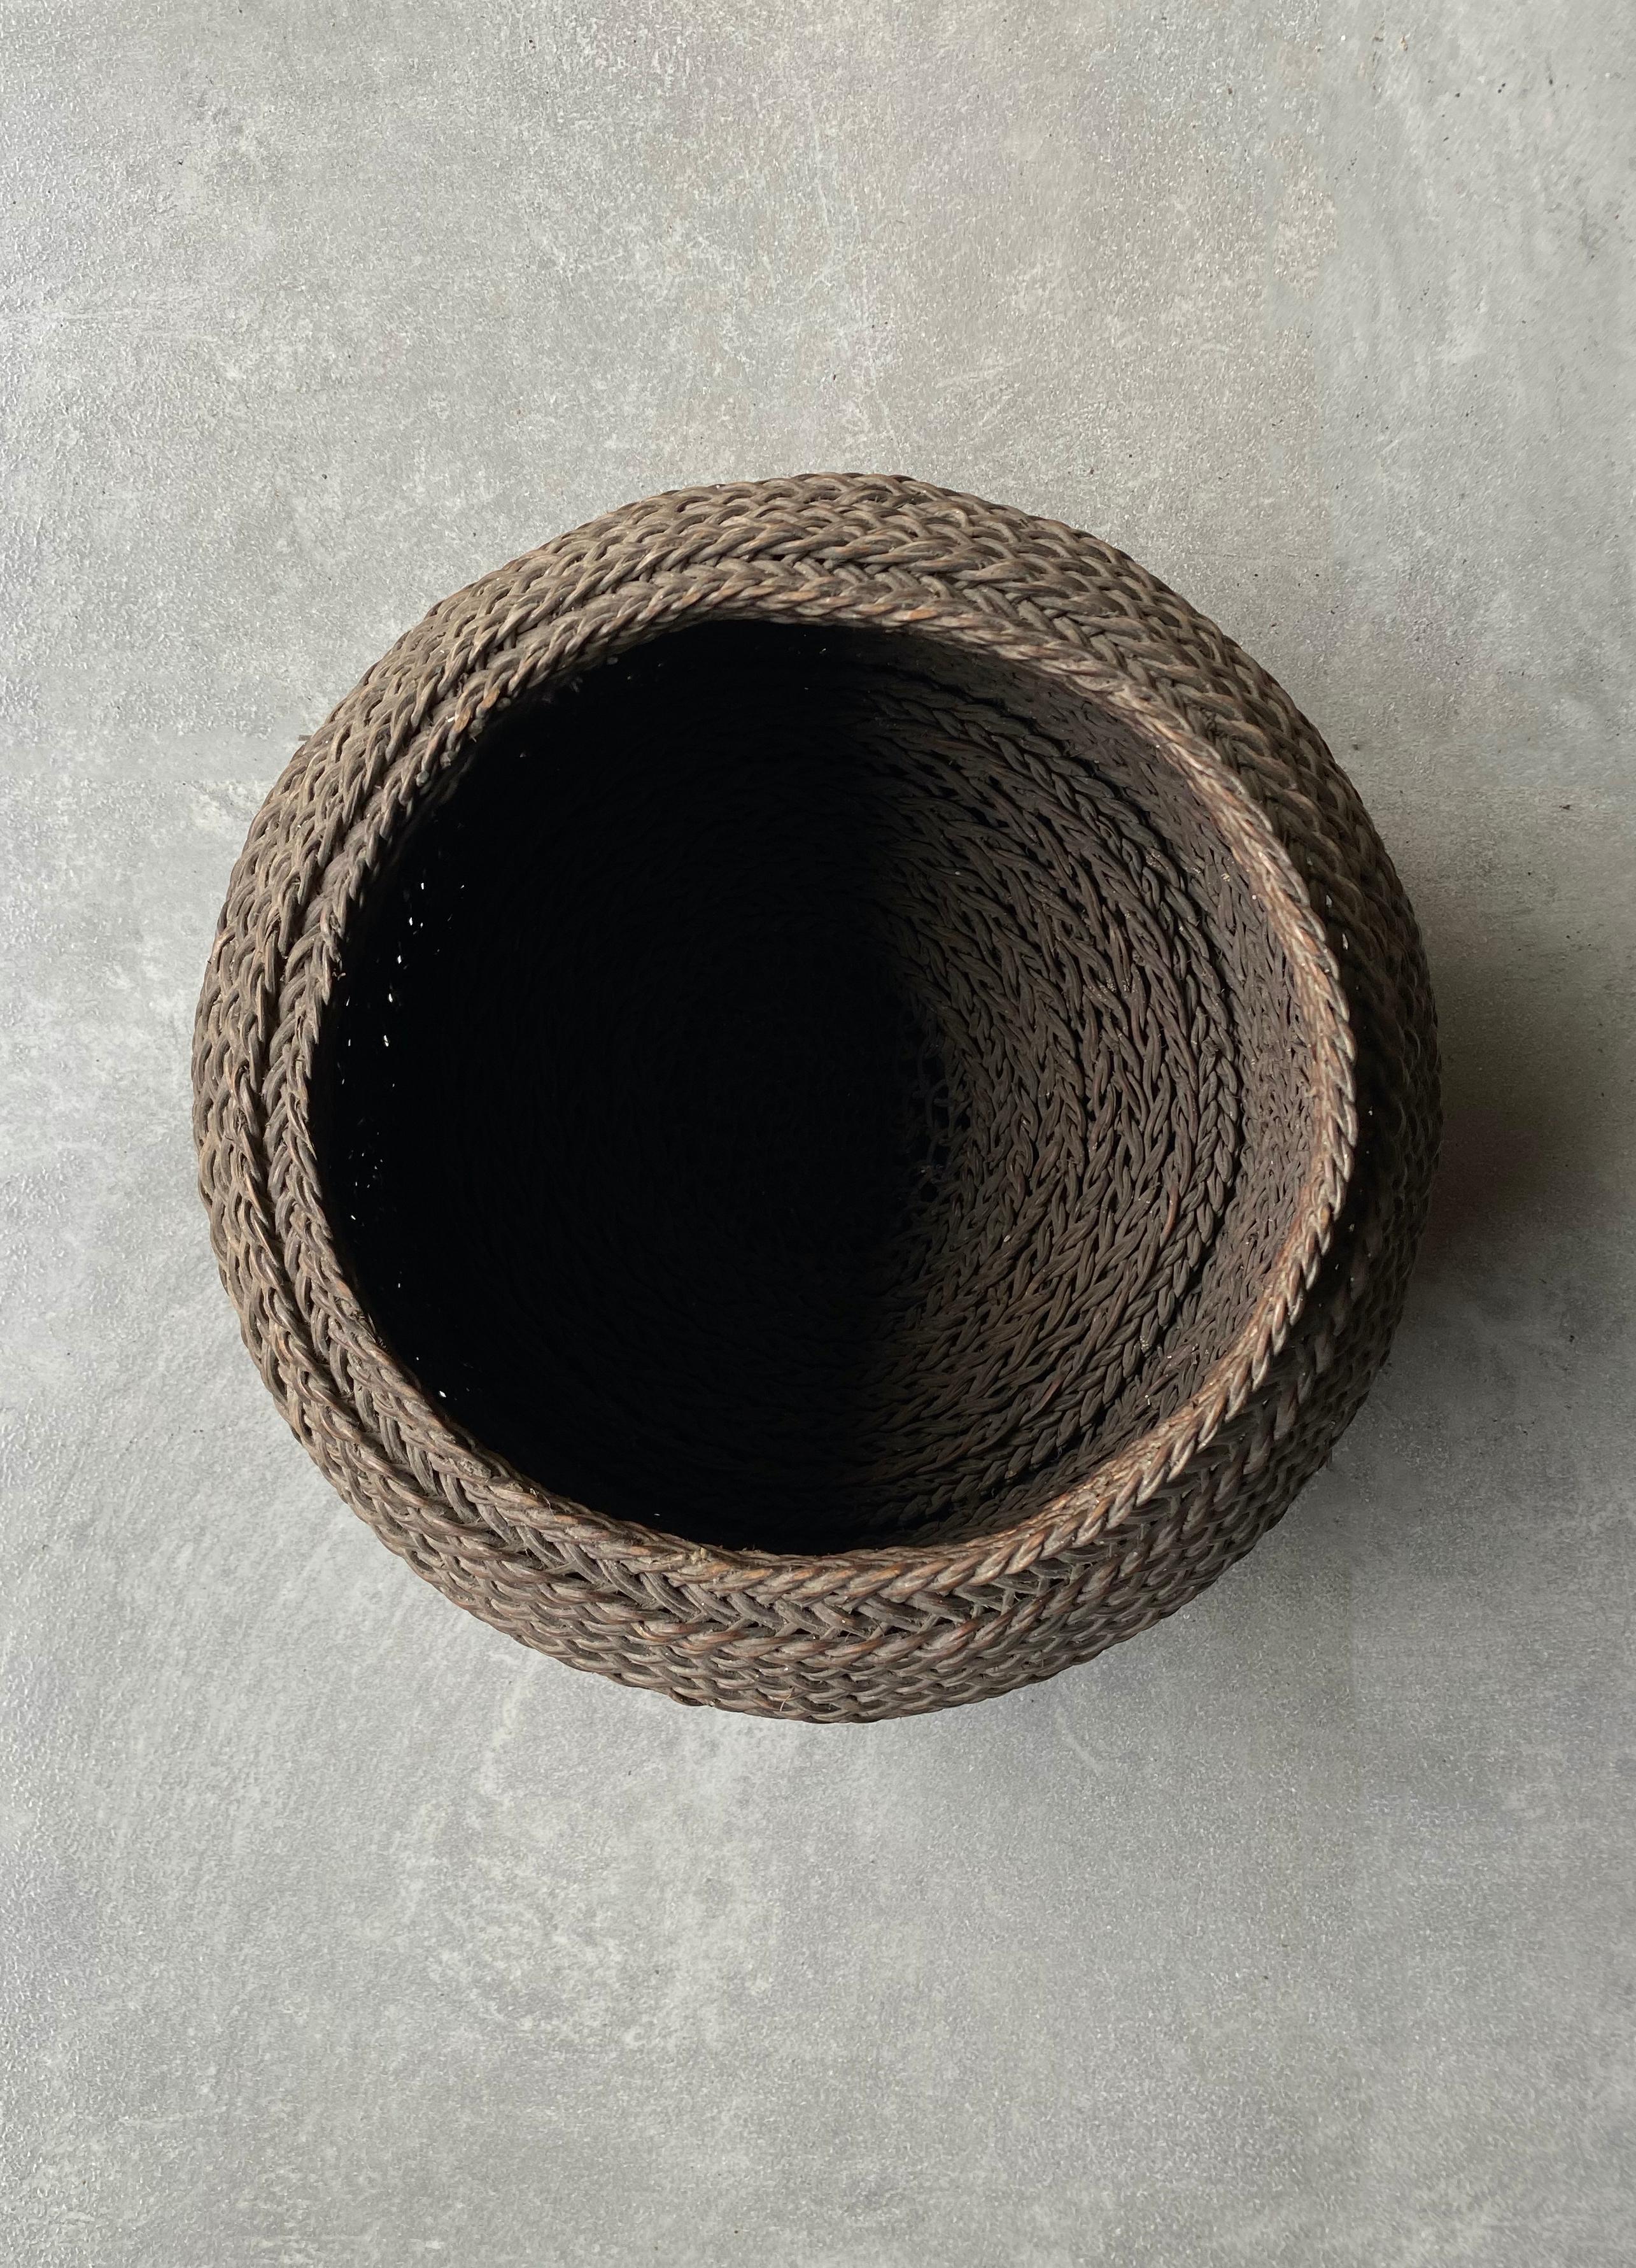 Indonesian Rattan Basket Hand-Woven from Toraja People of Sulawesi, Mid 20th Century